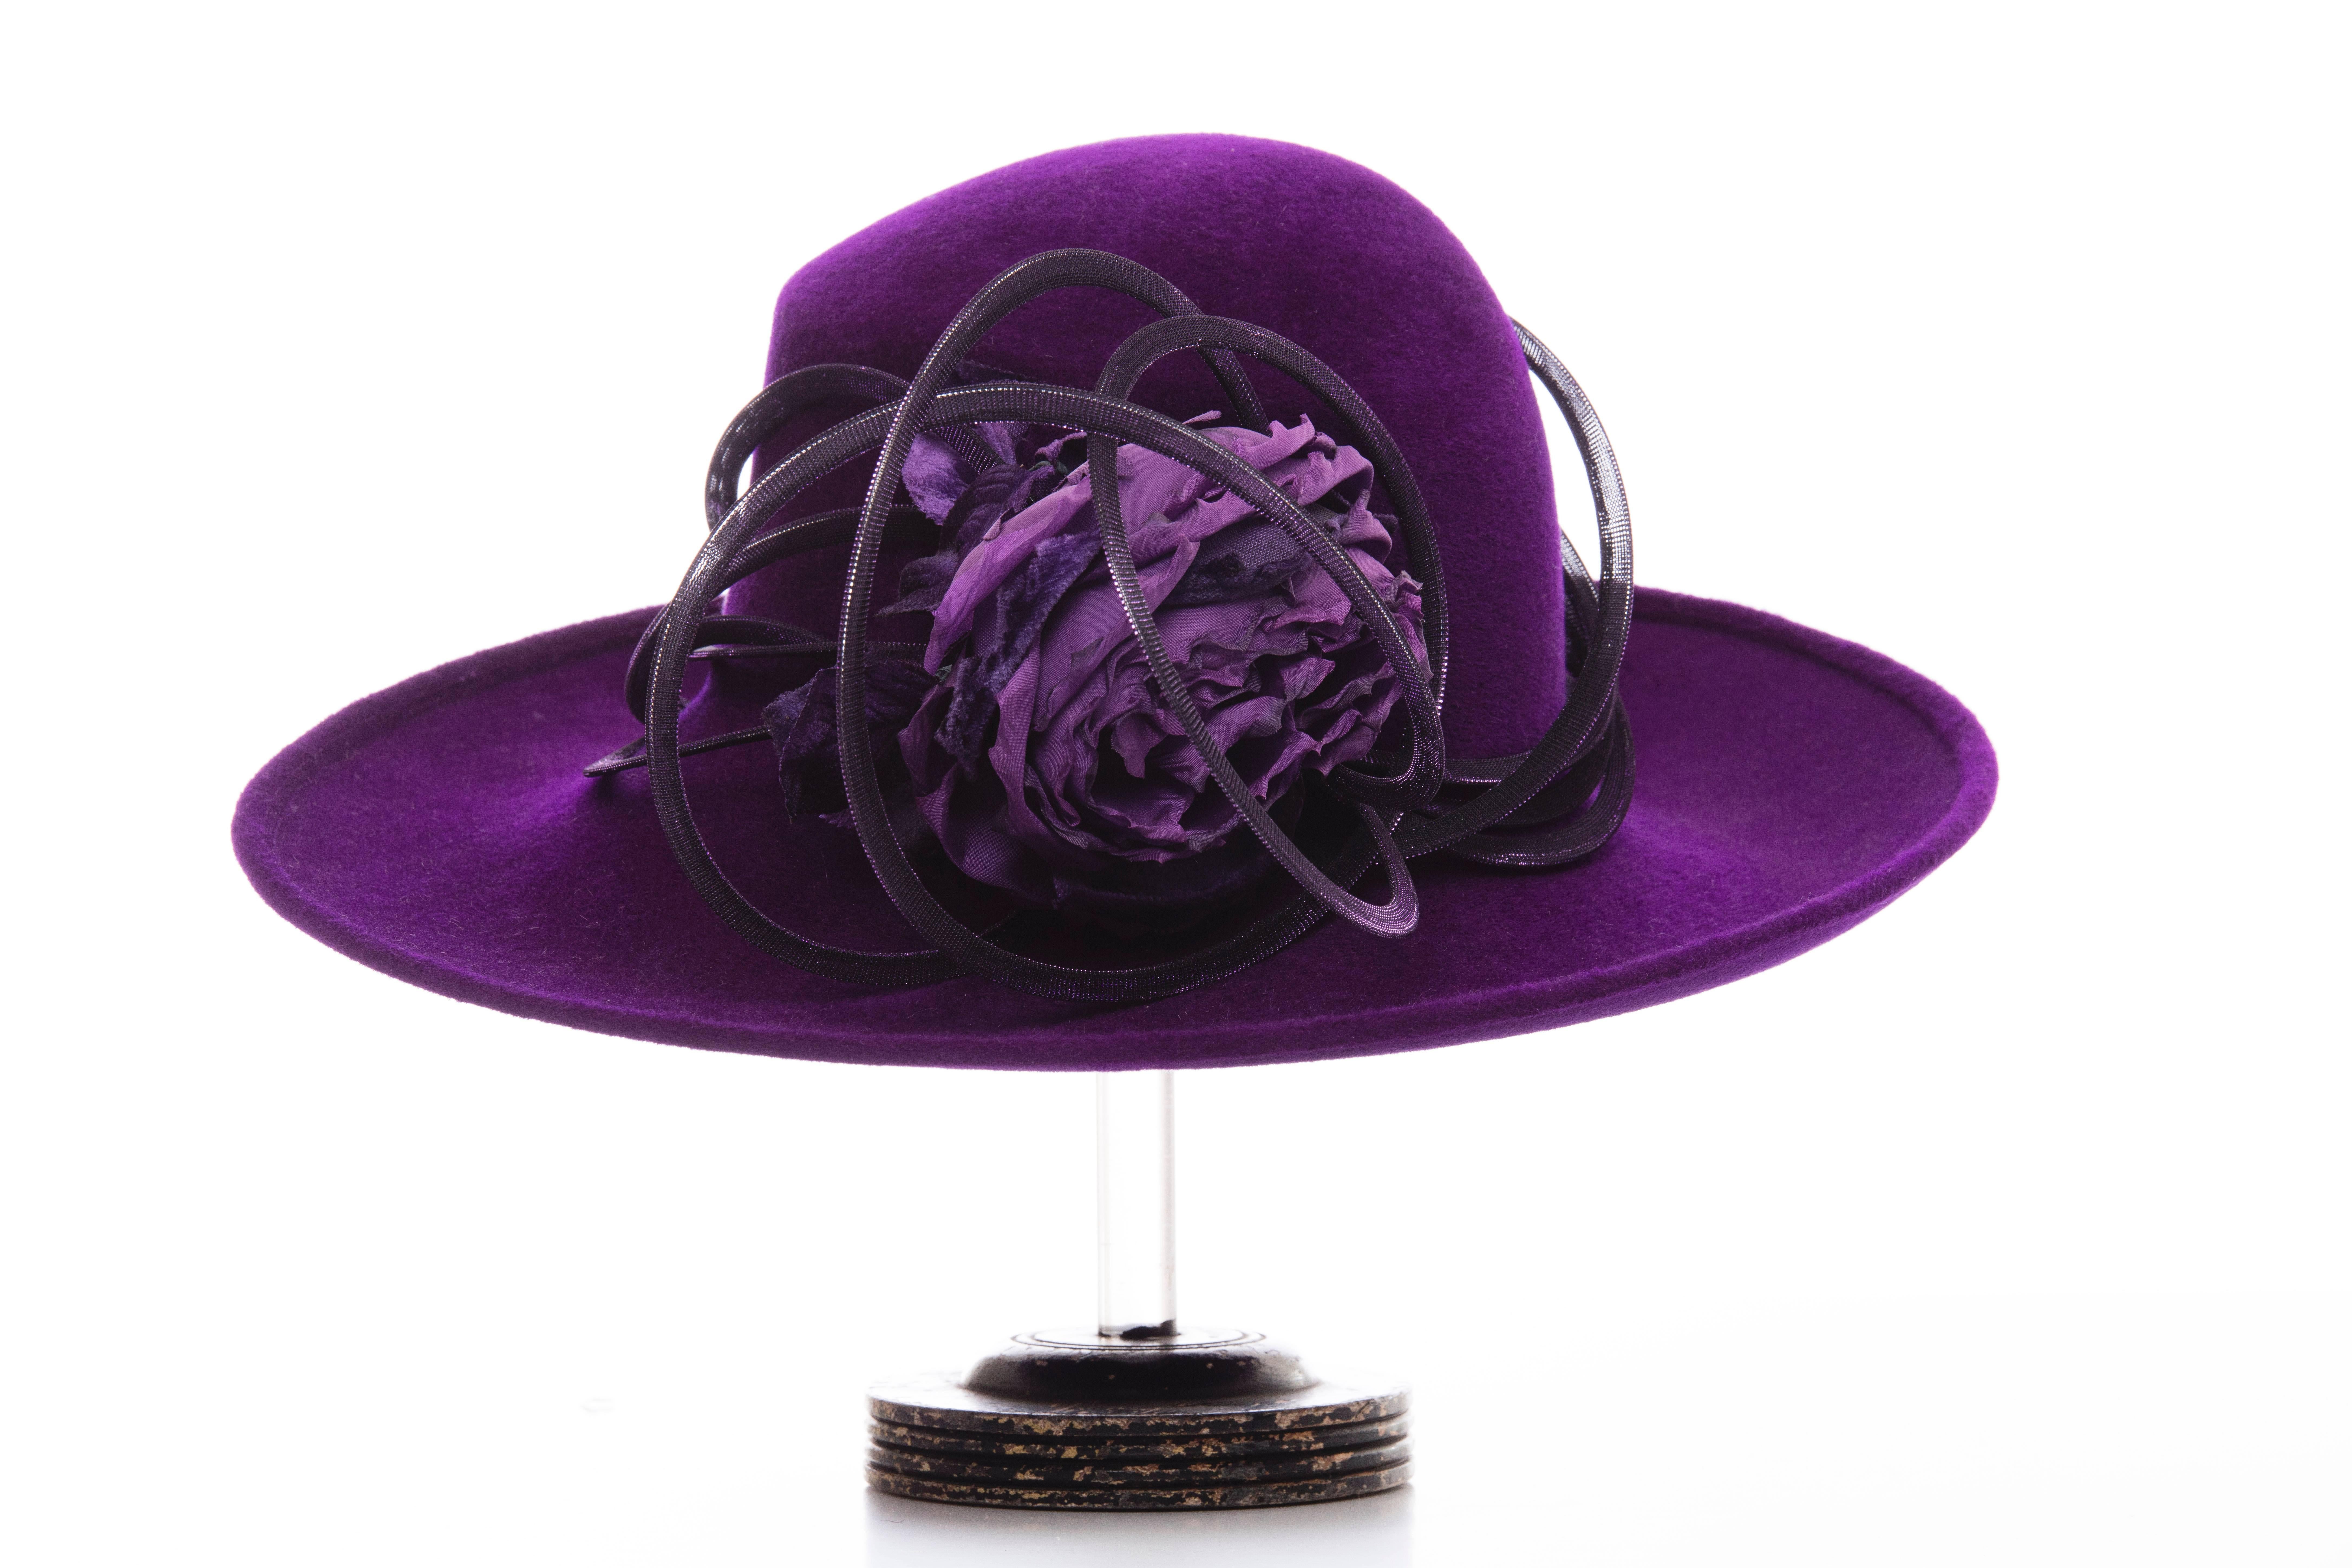 Philip Treacy wool derby hat with metallic mesh accents and oversize floral adornment. Includes box.

Circumference 23”, Brim 6”